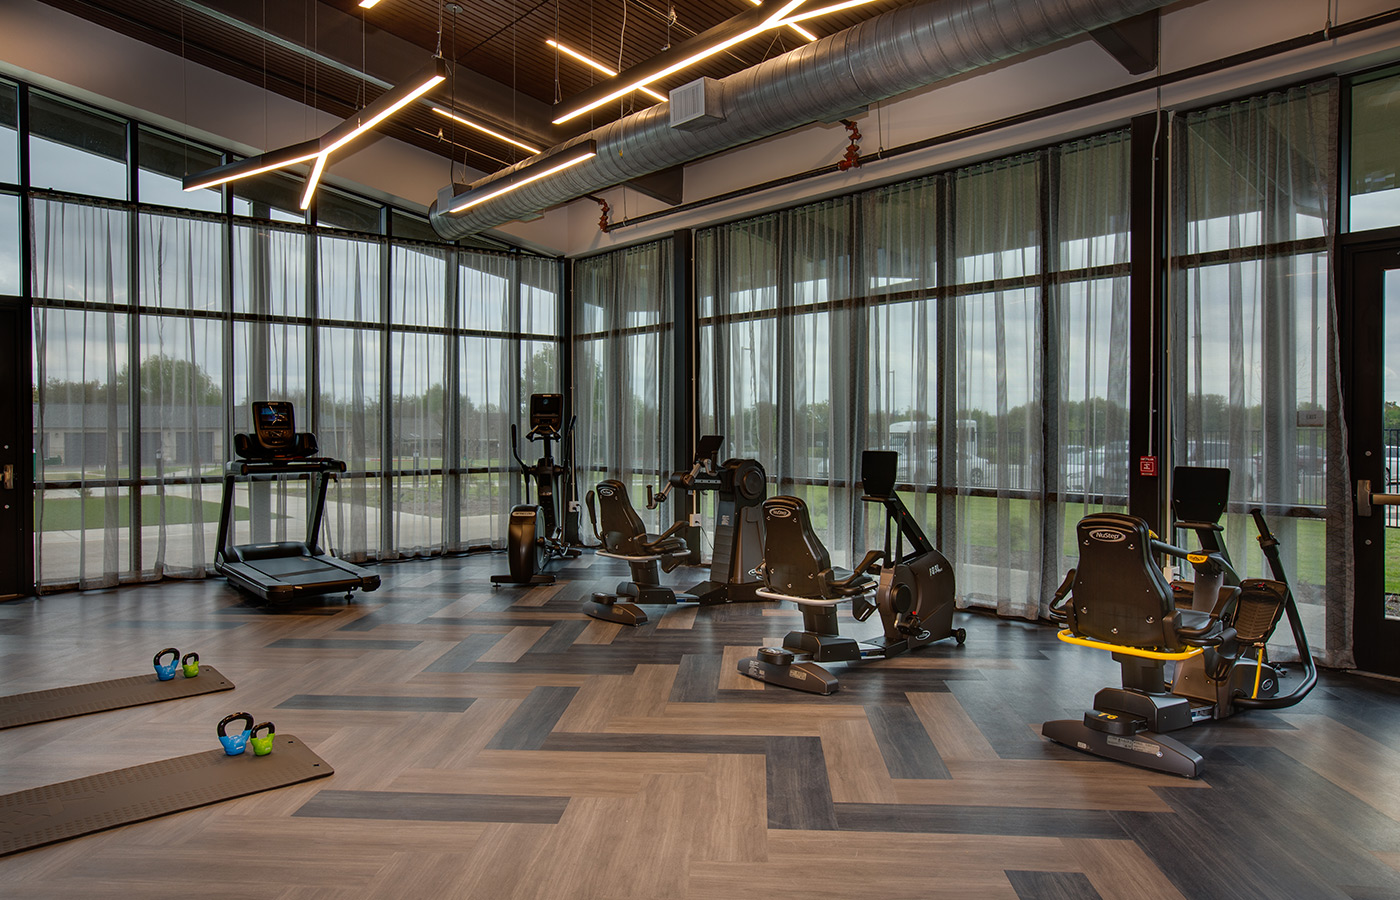 A fitness center with gym equipment.